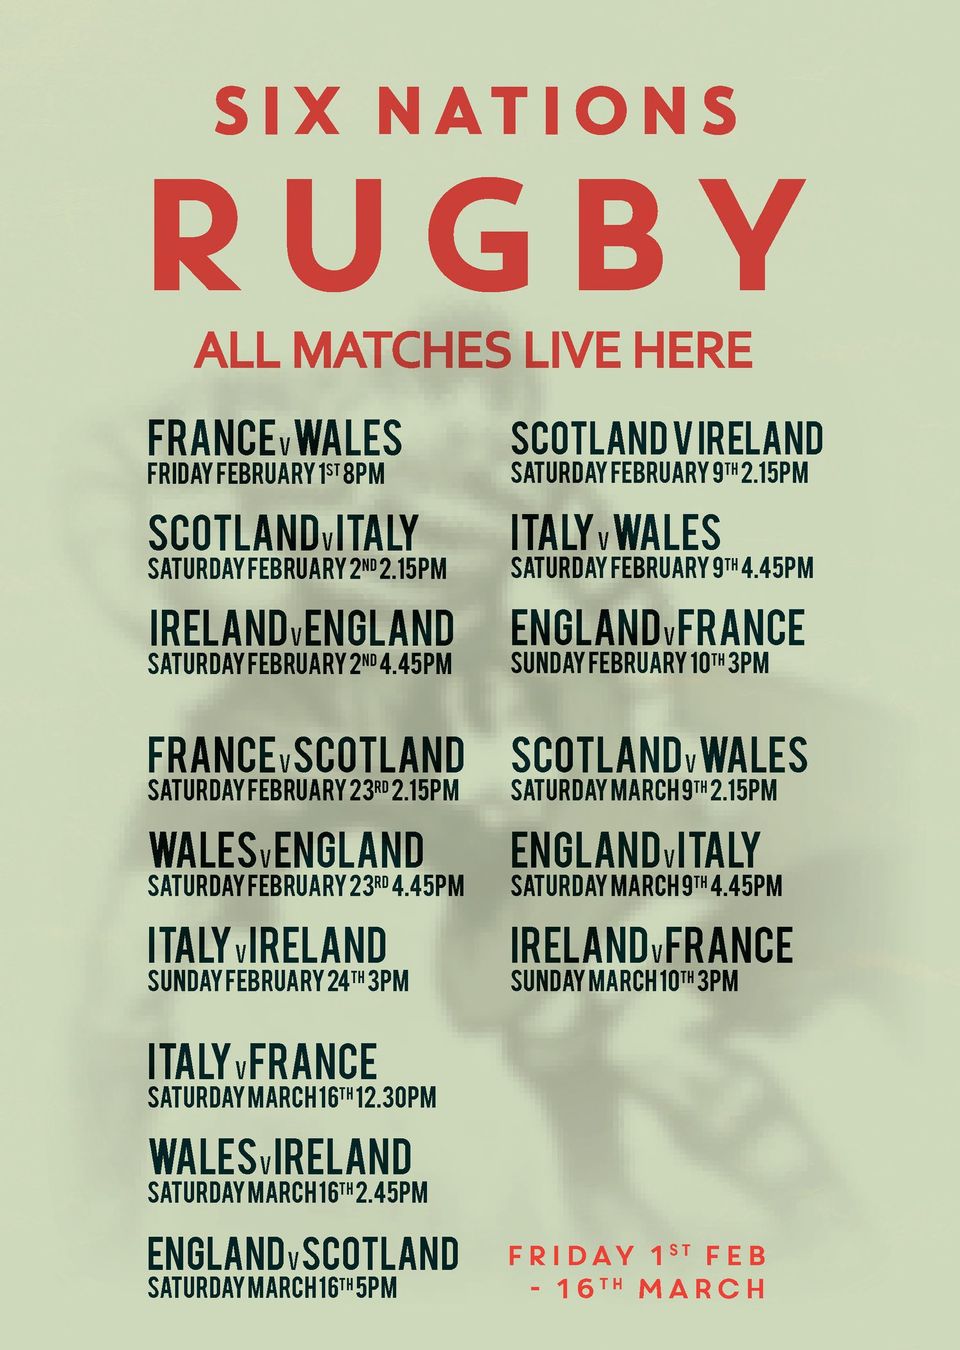 Come watch Six Nations Rugby with us!